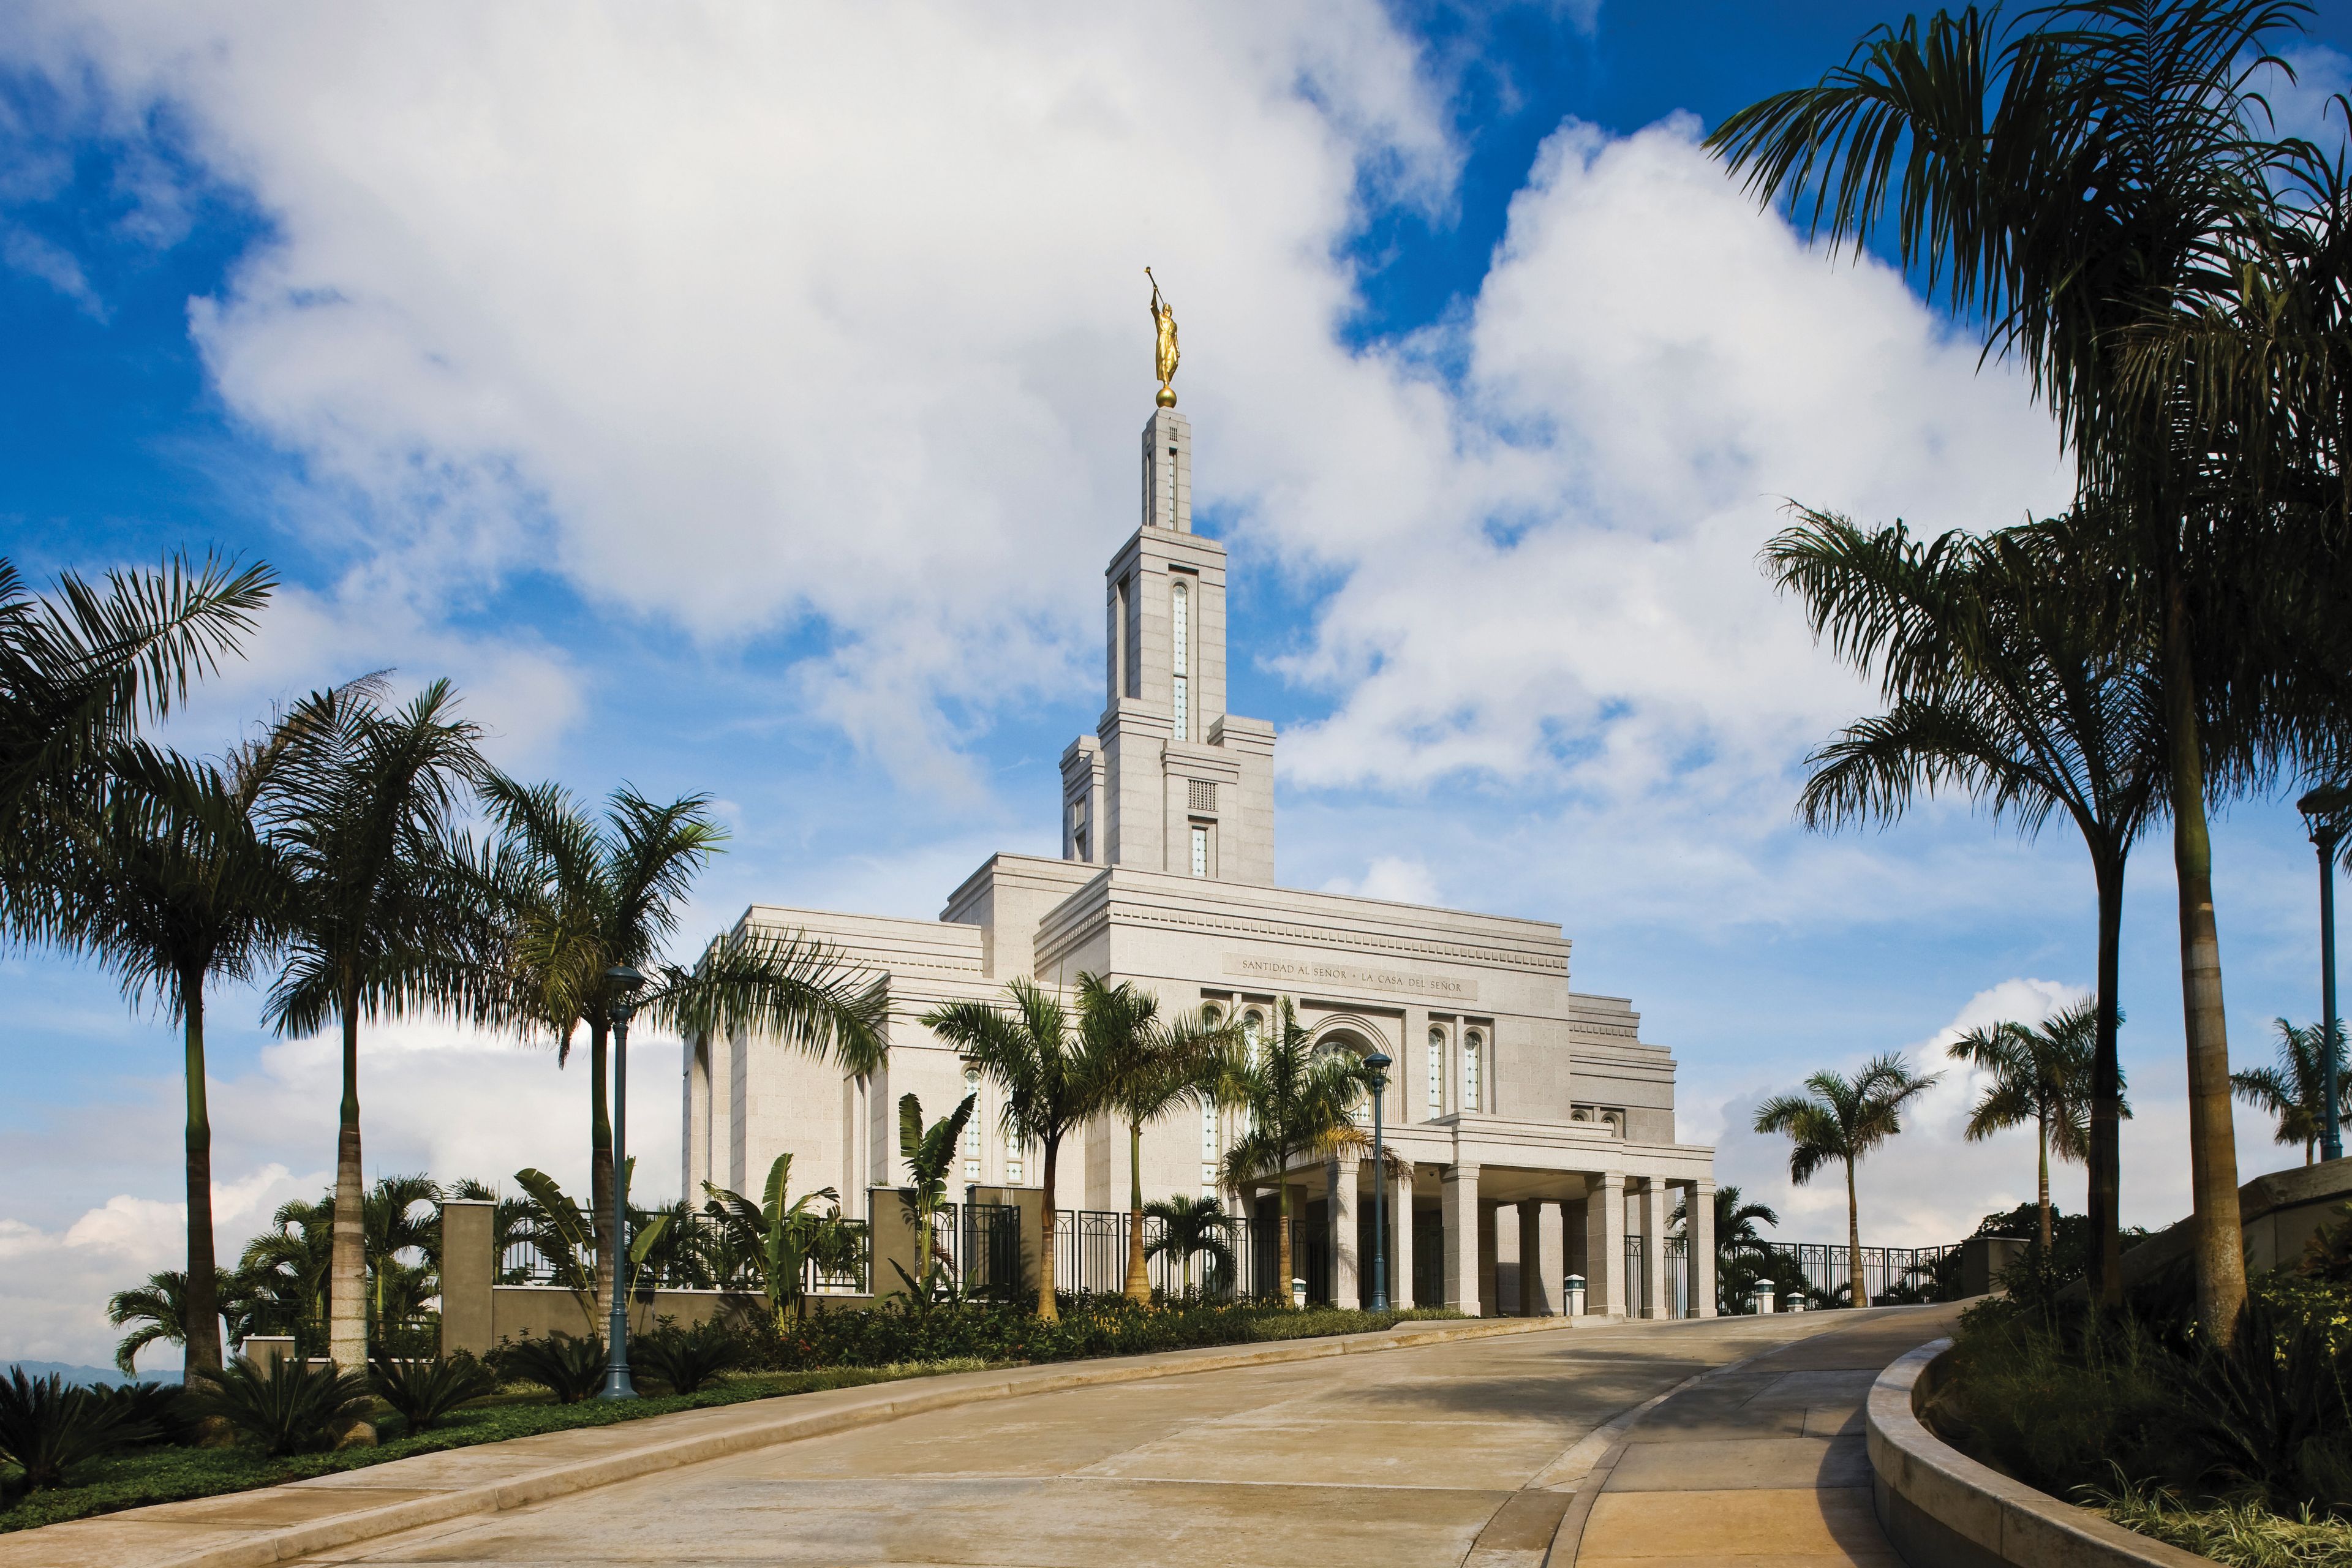 The Panama City Panama Temple, including the entrance and scenery.